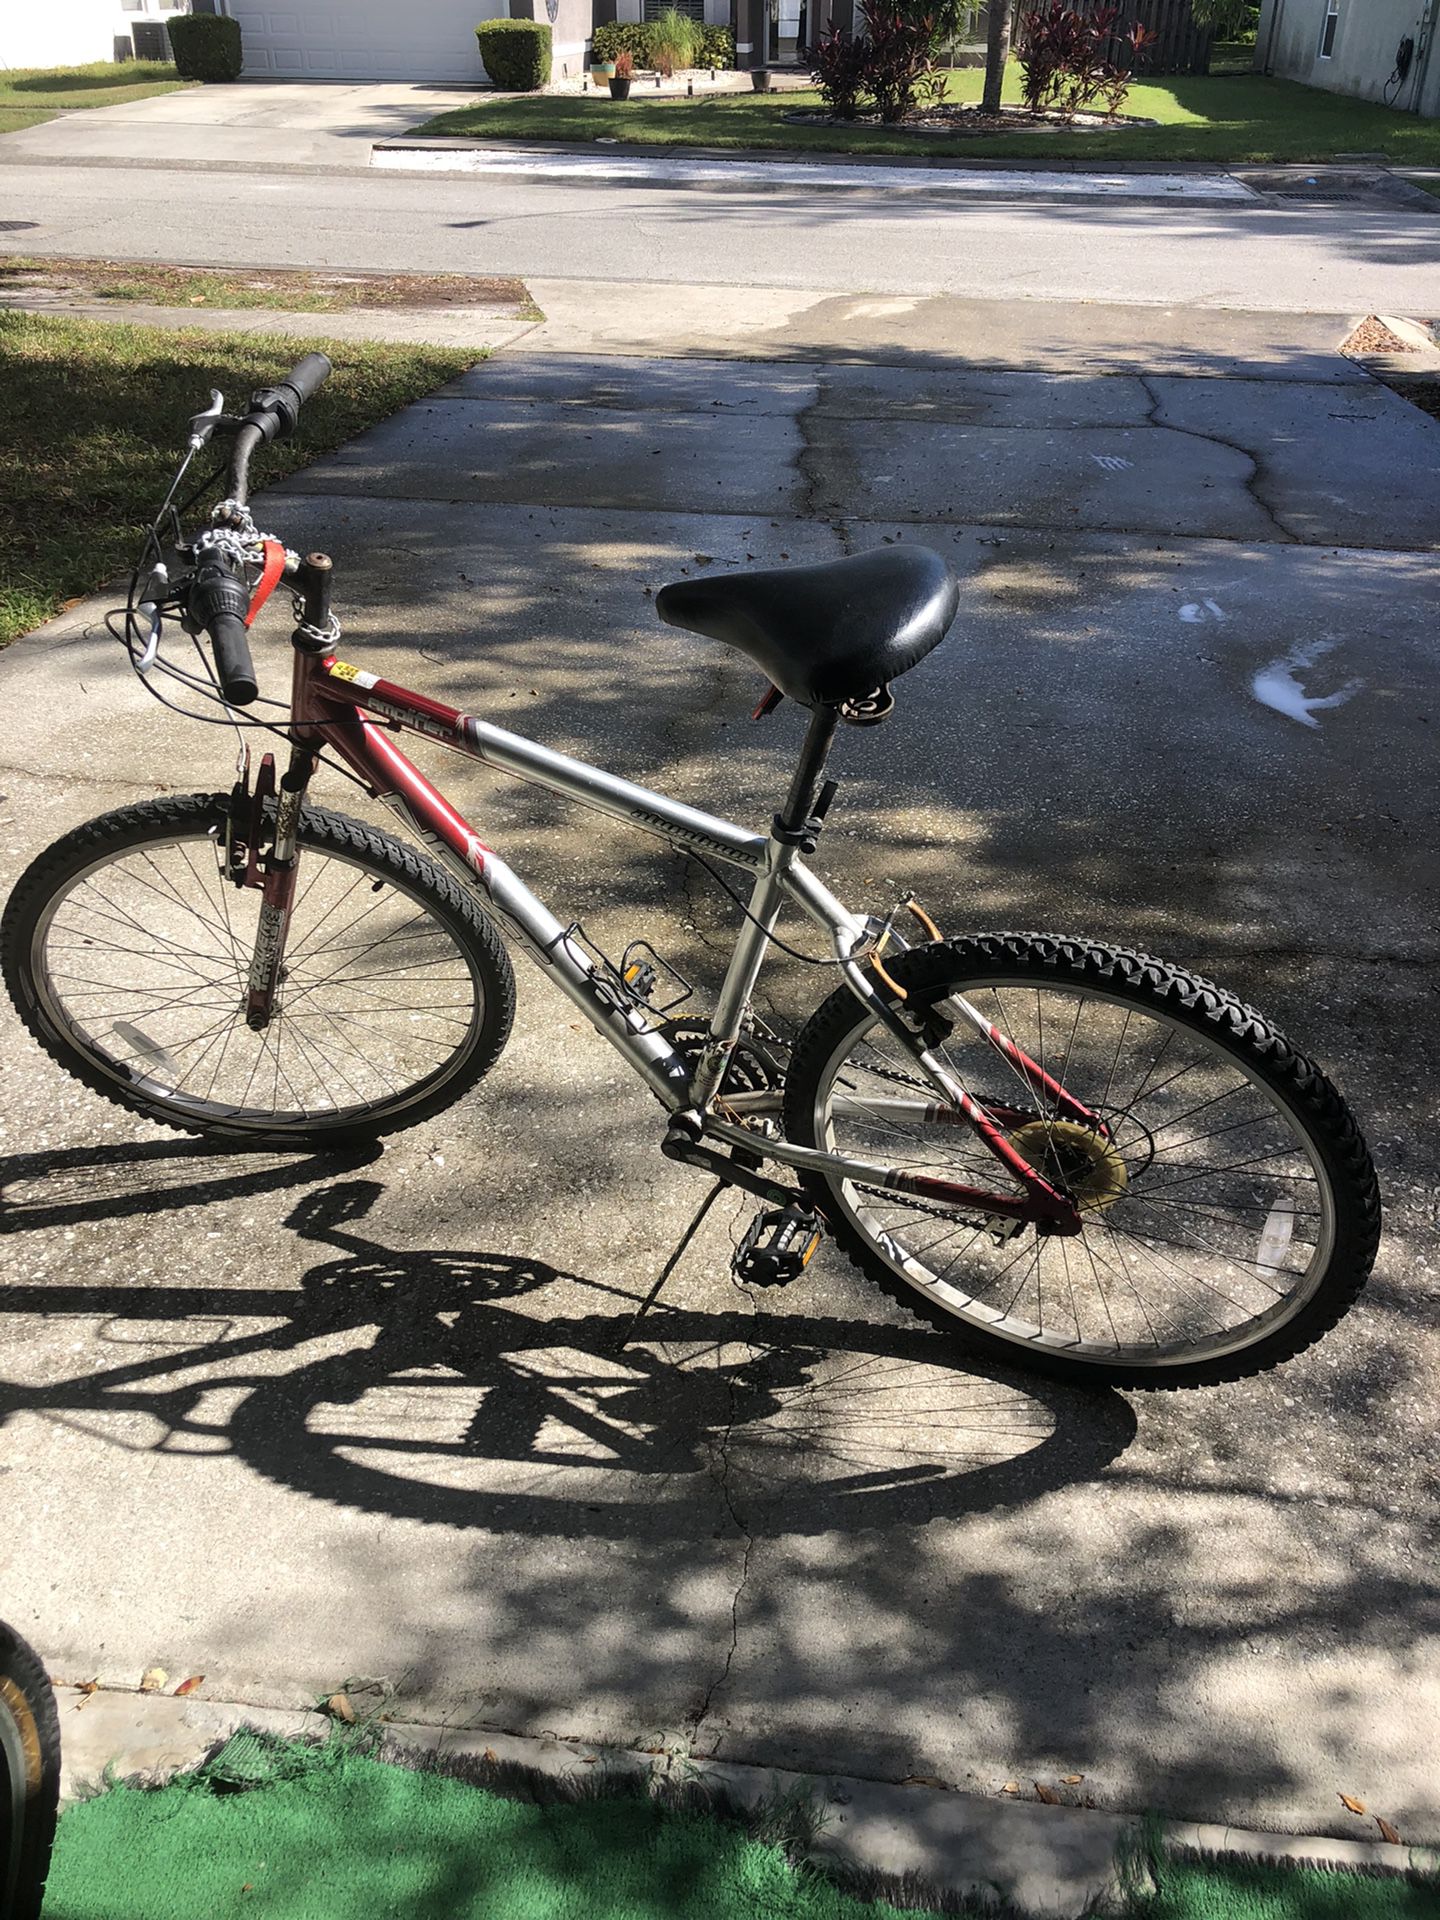 Good Running Bike , New Tire Installed 6 Months ago . Shift Good .it’s Has Been Sitting In The Garage .